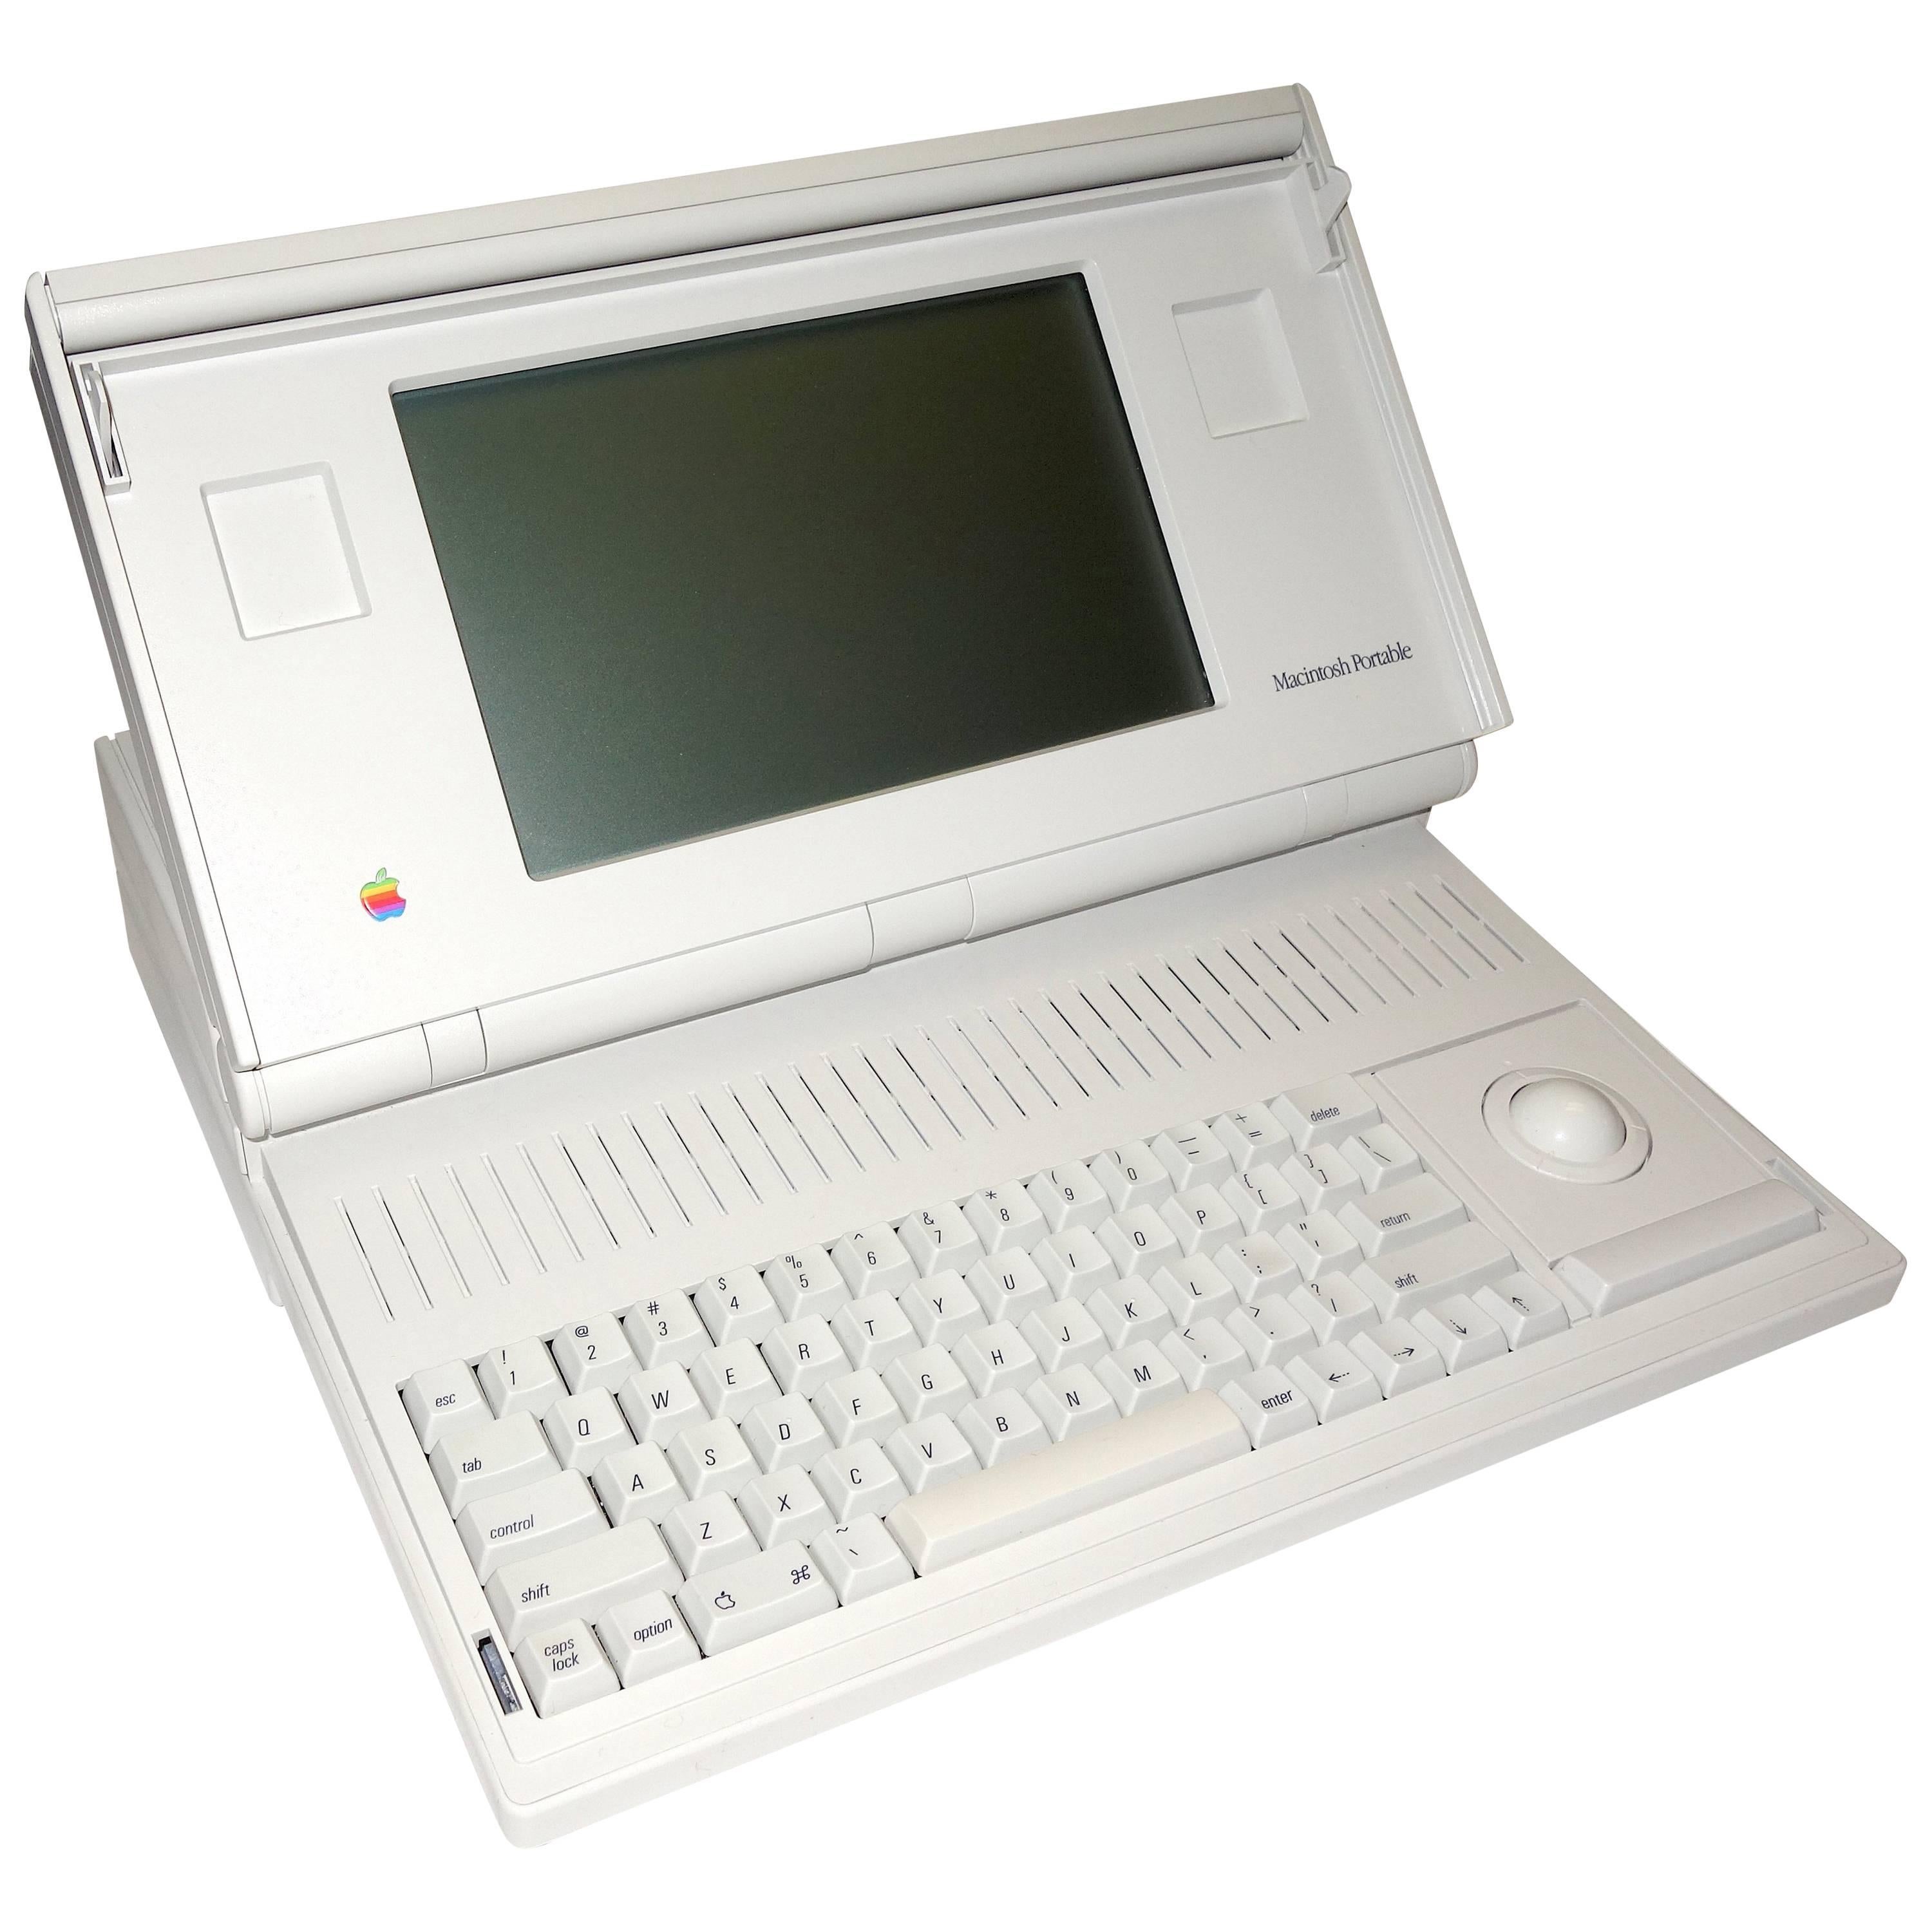 First Macintosh Portable Computer, As New, Vintage Iconic RARE Steve Jobs Design For Sale